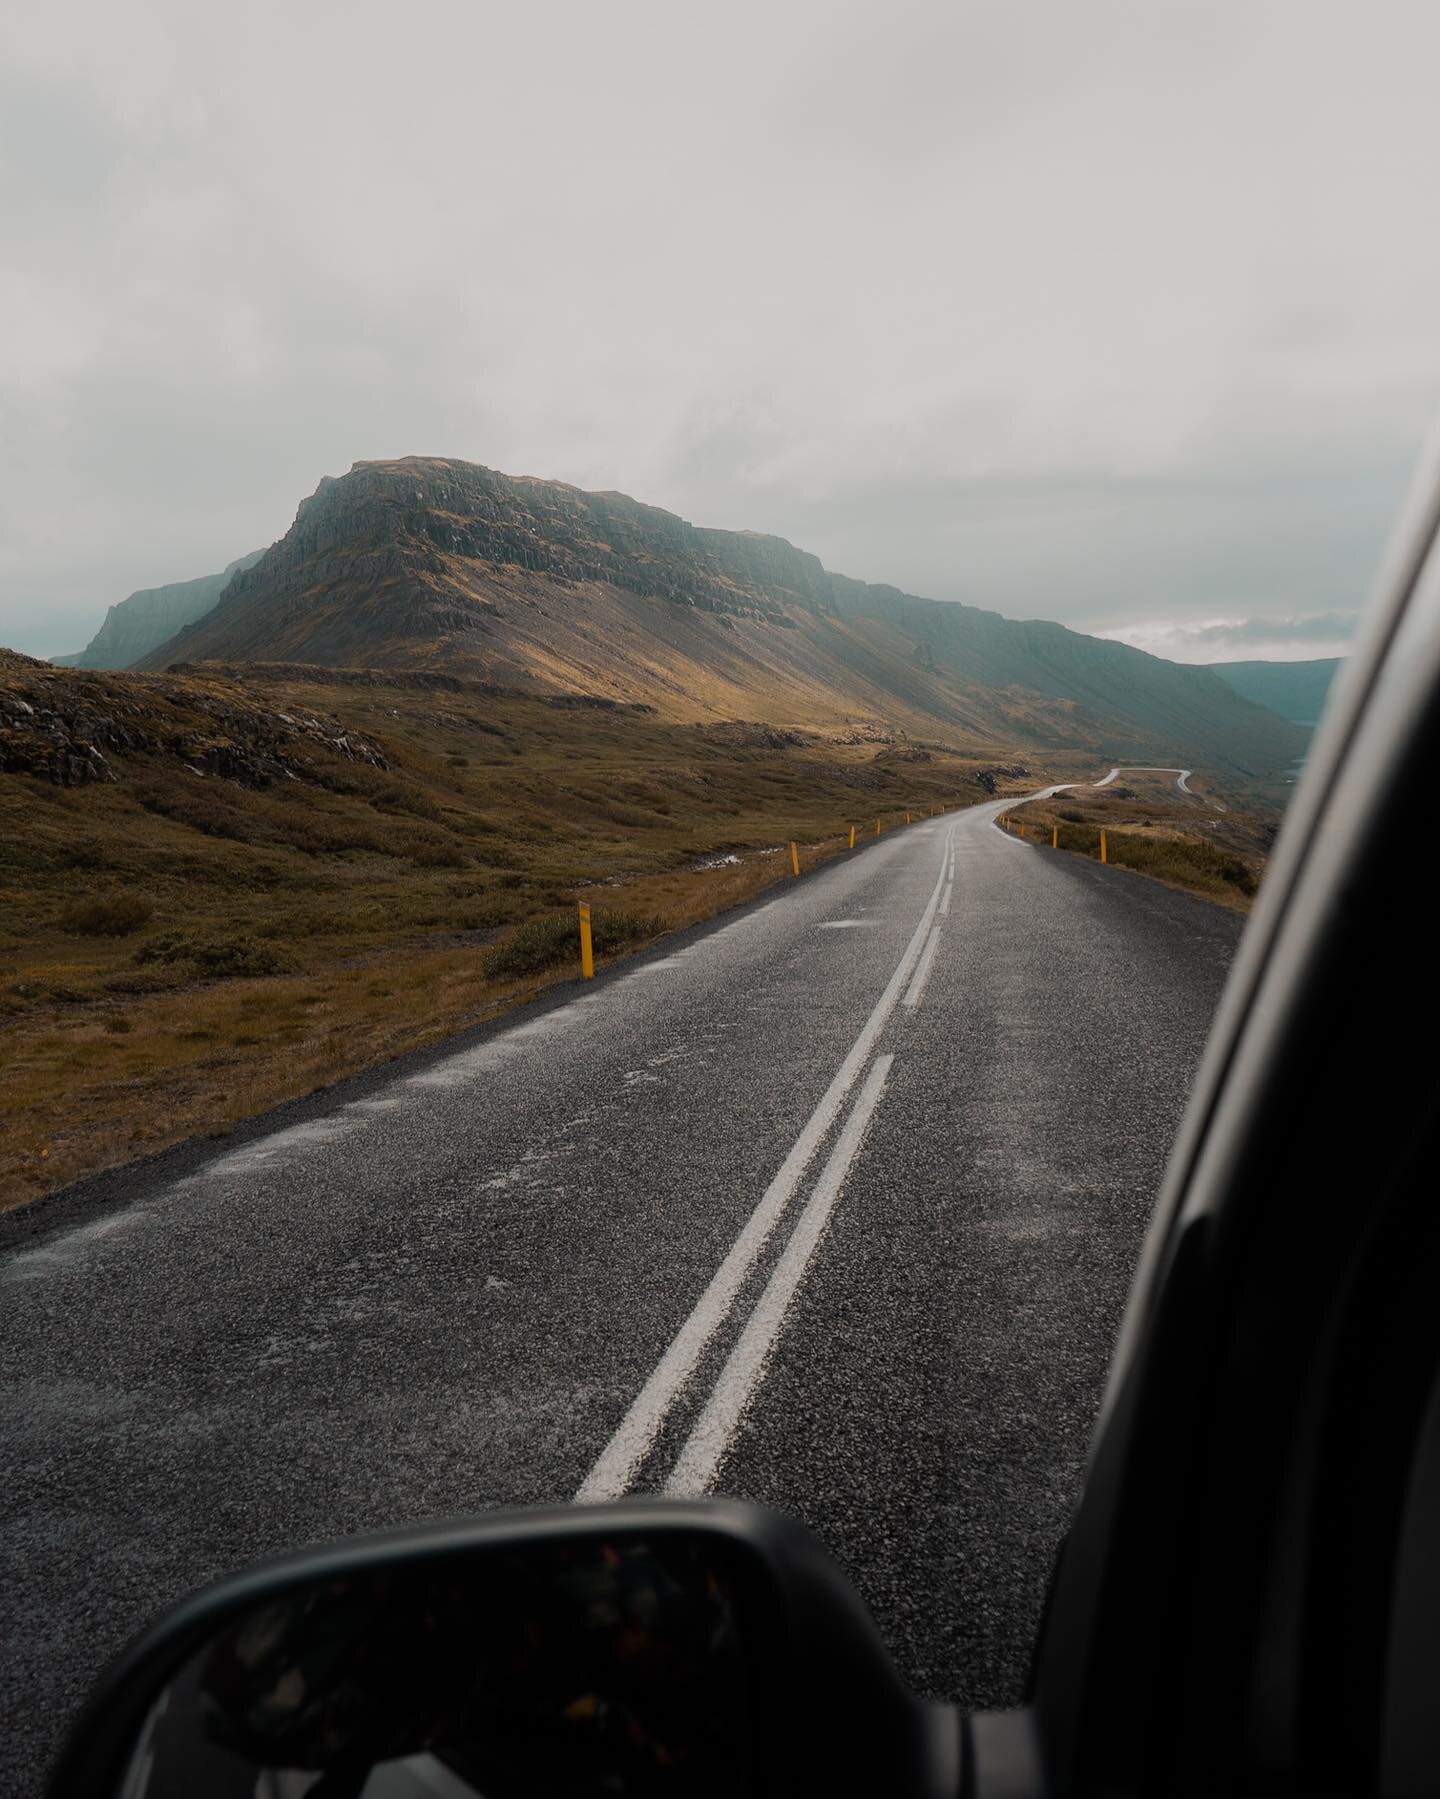 Scenes from the Icelandic open road are my favorite kind of view. 1, 2, or 3? (Shoutout to our ride @campeasyiceland )
.
.
.
.
.
.
#passionpassport #folktravel #folkgreen #iceland #travelphotography #artofvisuals #worldnomads #outdoortones #wildernes